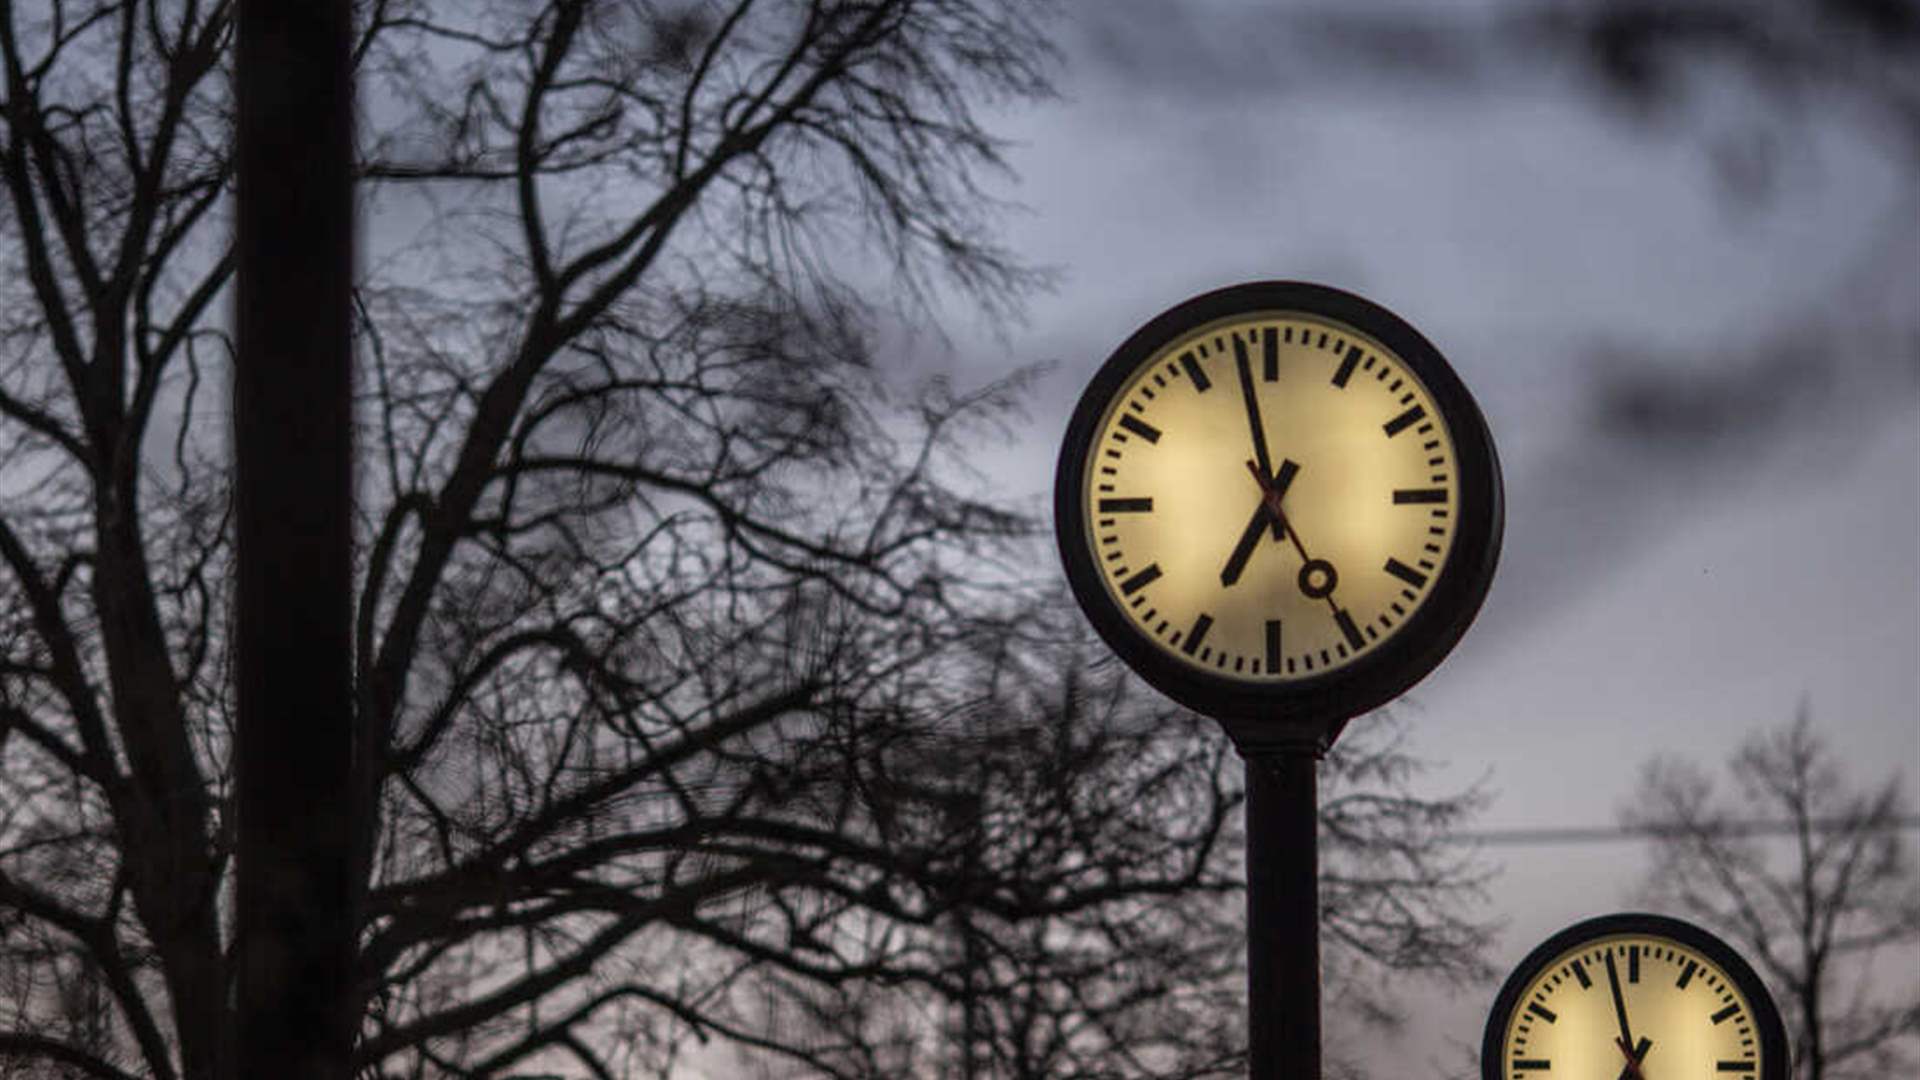 Lost in time: Exploring the history and varied practices of daylight saving time